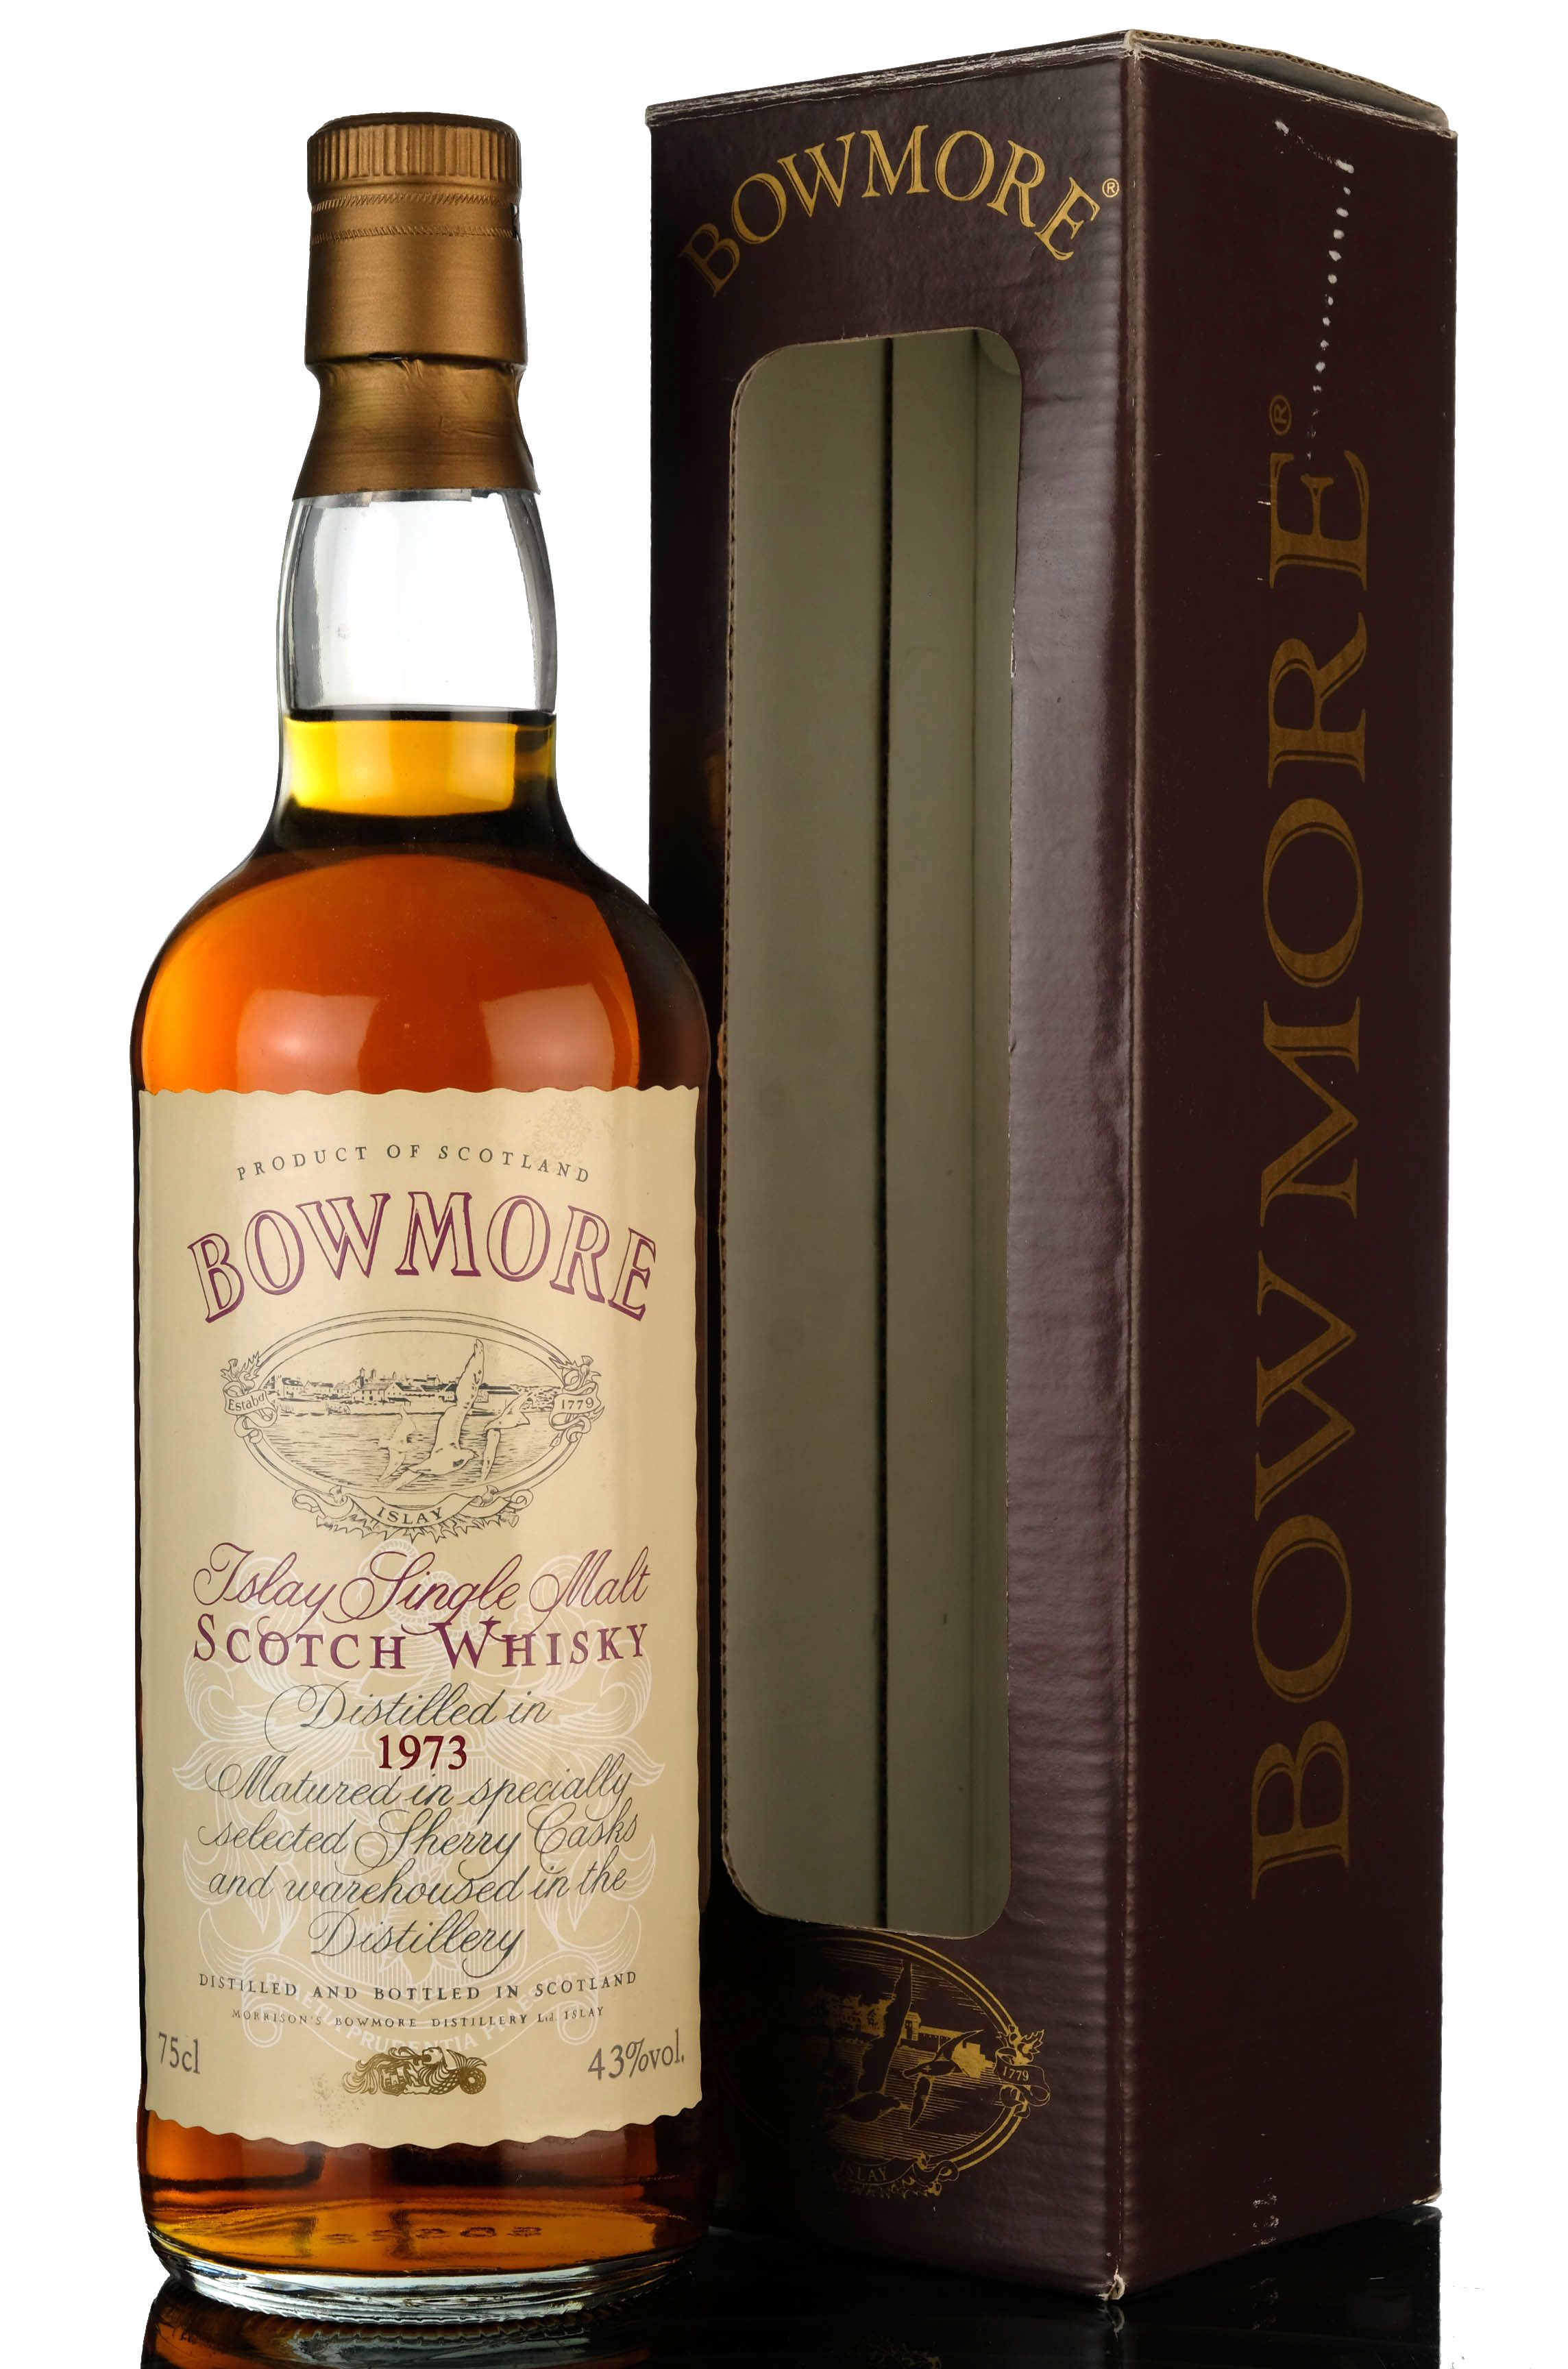 Bowmore 1973 - Sherry Cask - Vintage Label - Butts 5173 & 5174